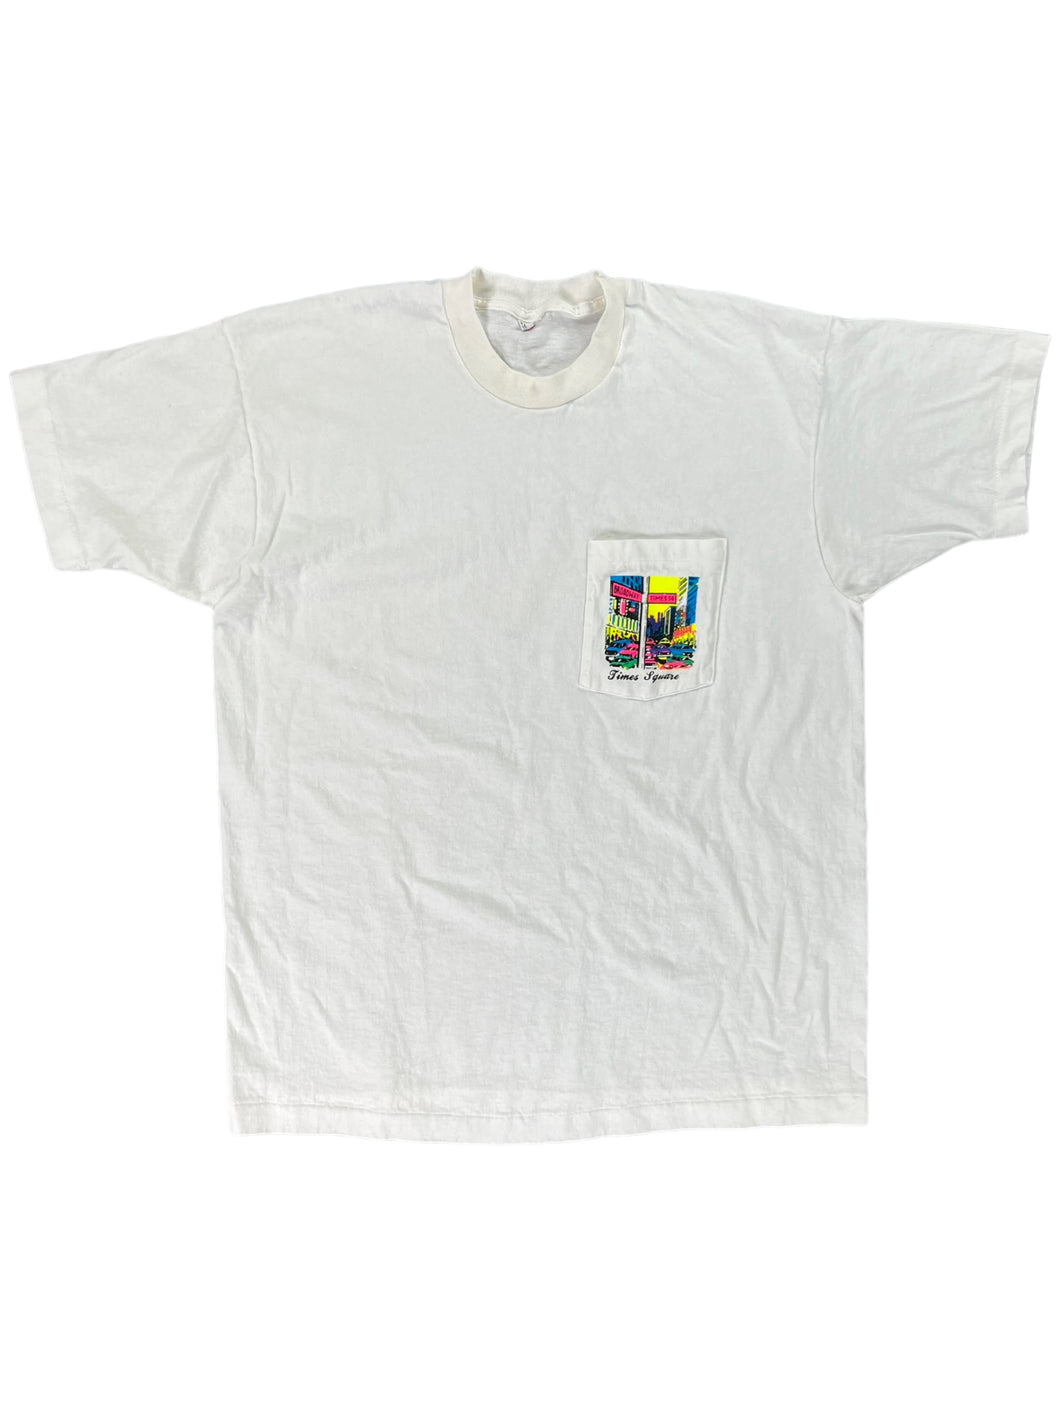 Vintage 90s New York City NYC Times Square pocket tee (XL)